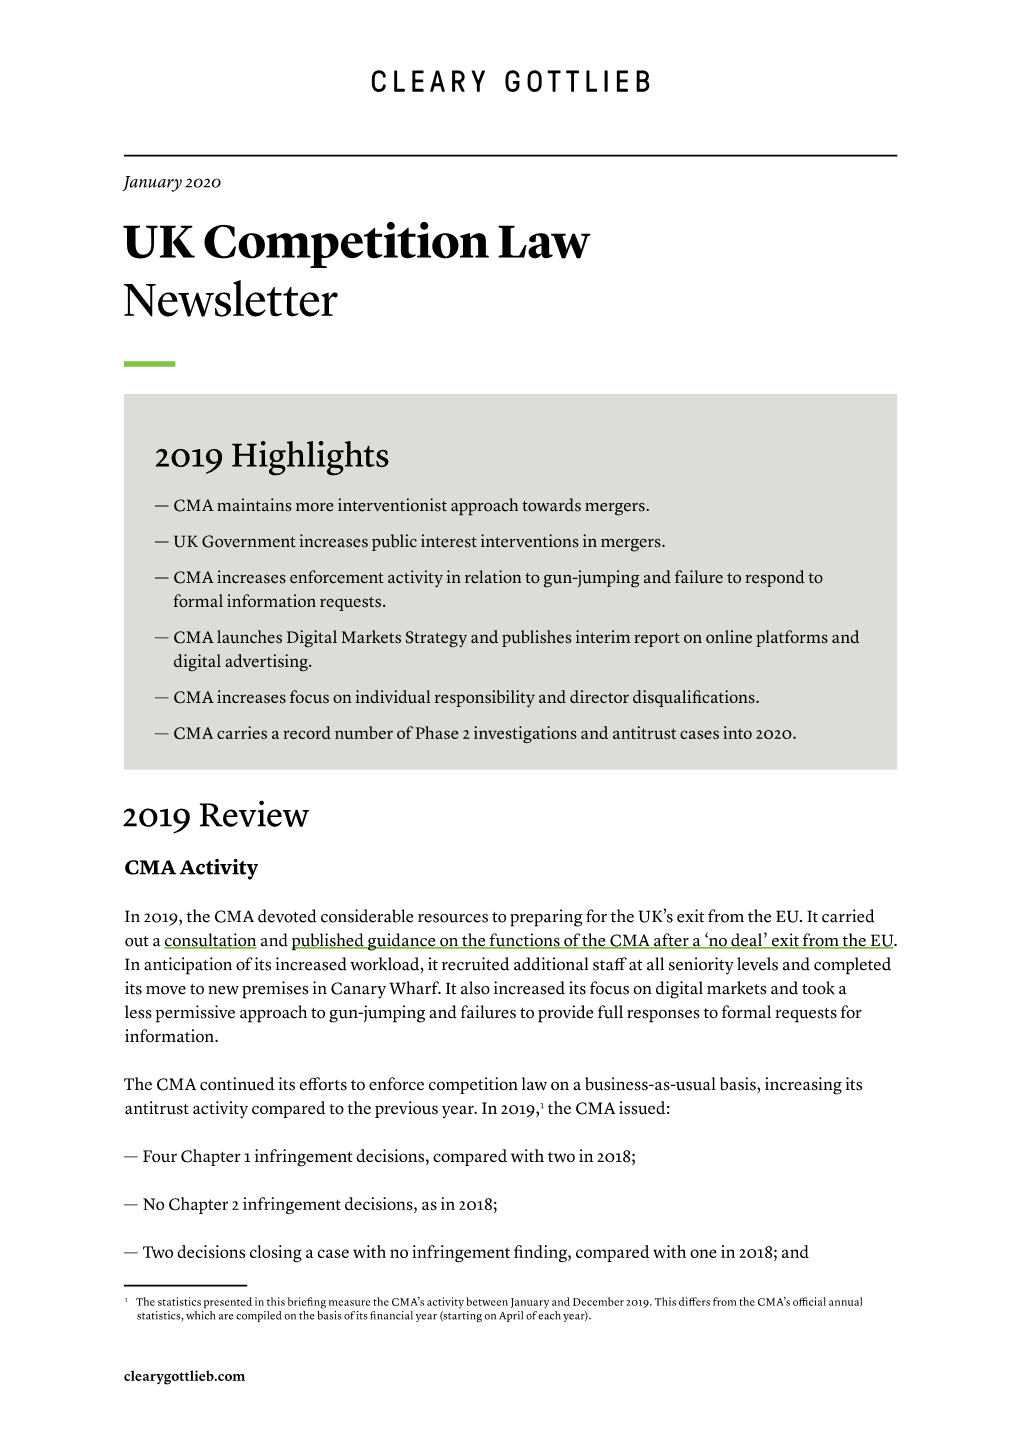 UK Competition Law Newsletter January 2020